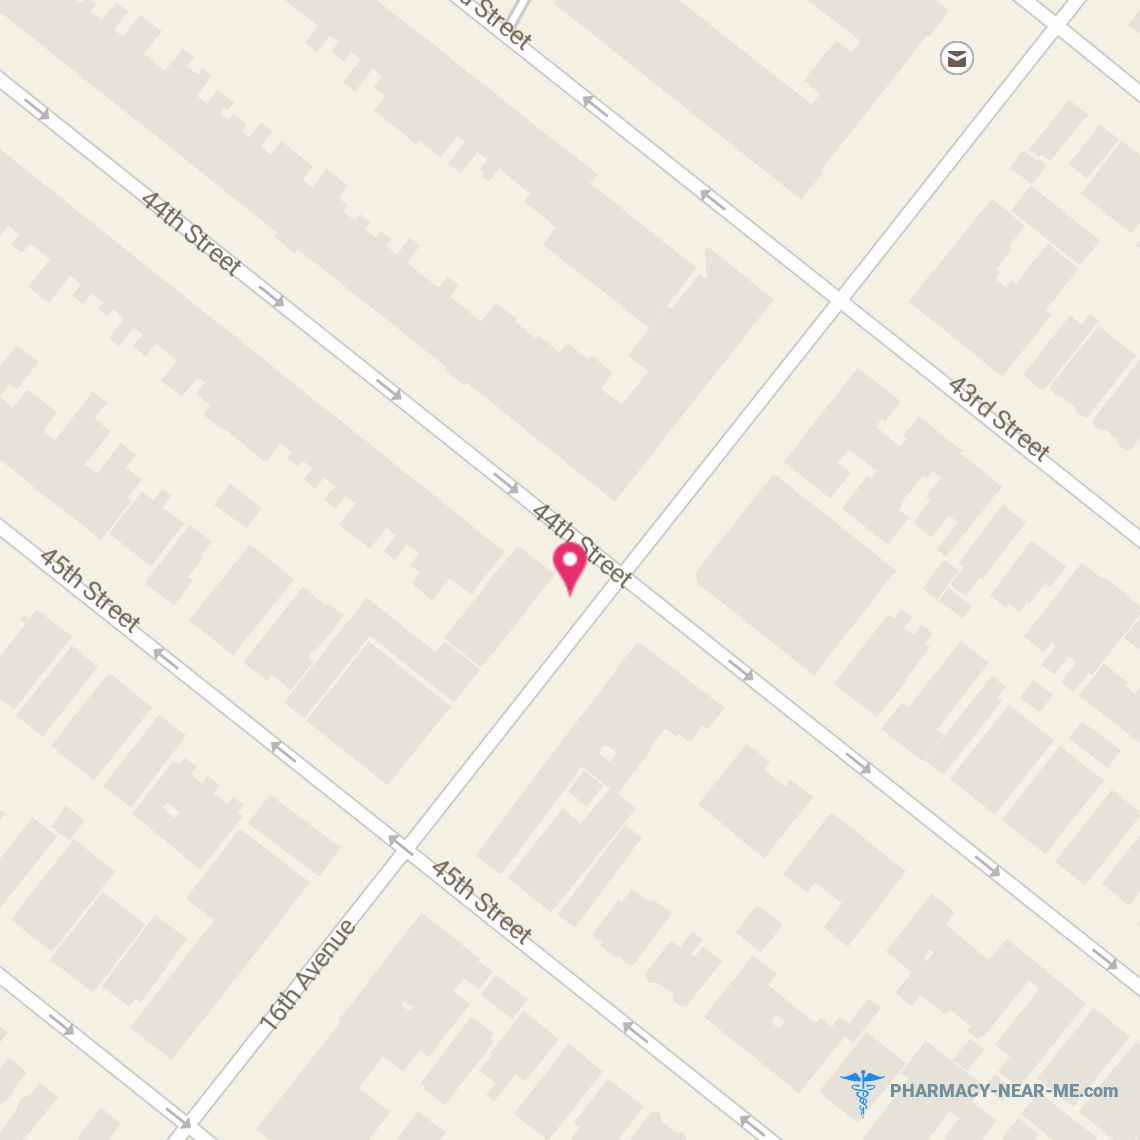 16TH AVENUE DRUG CORP - Pharmacy Hours, Phone, Reviews & Information: 4408 16th Avenue, Brooklyn, New York 11204, United States